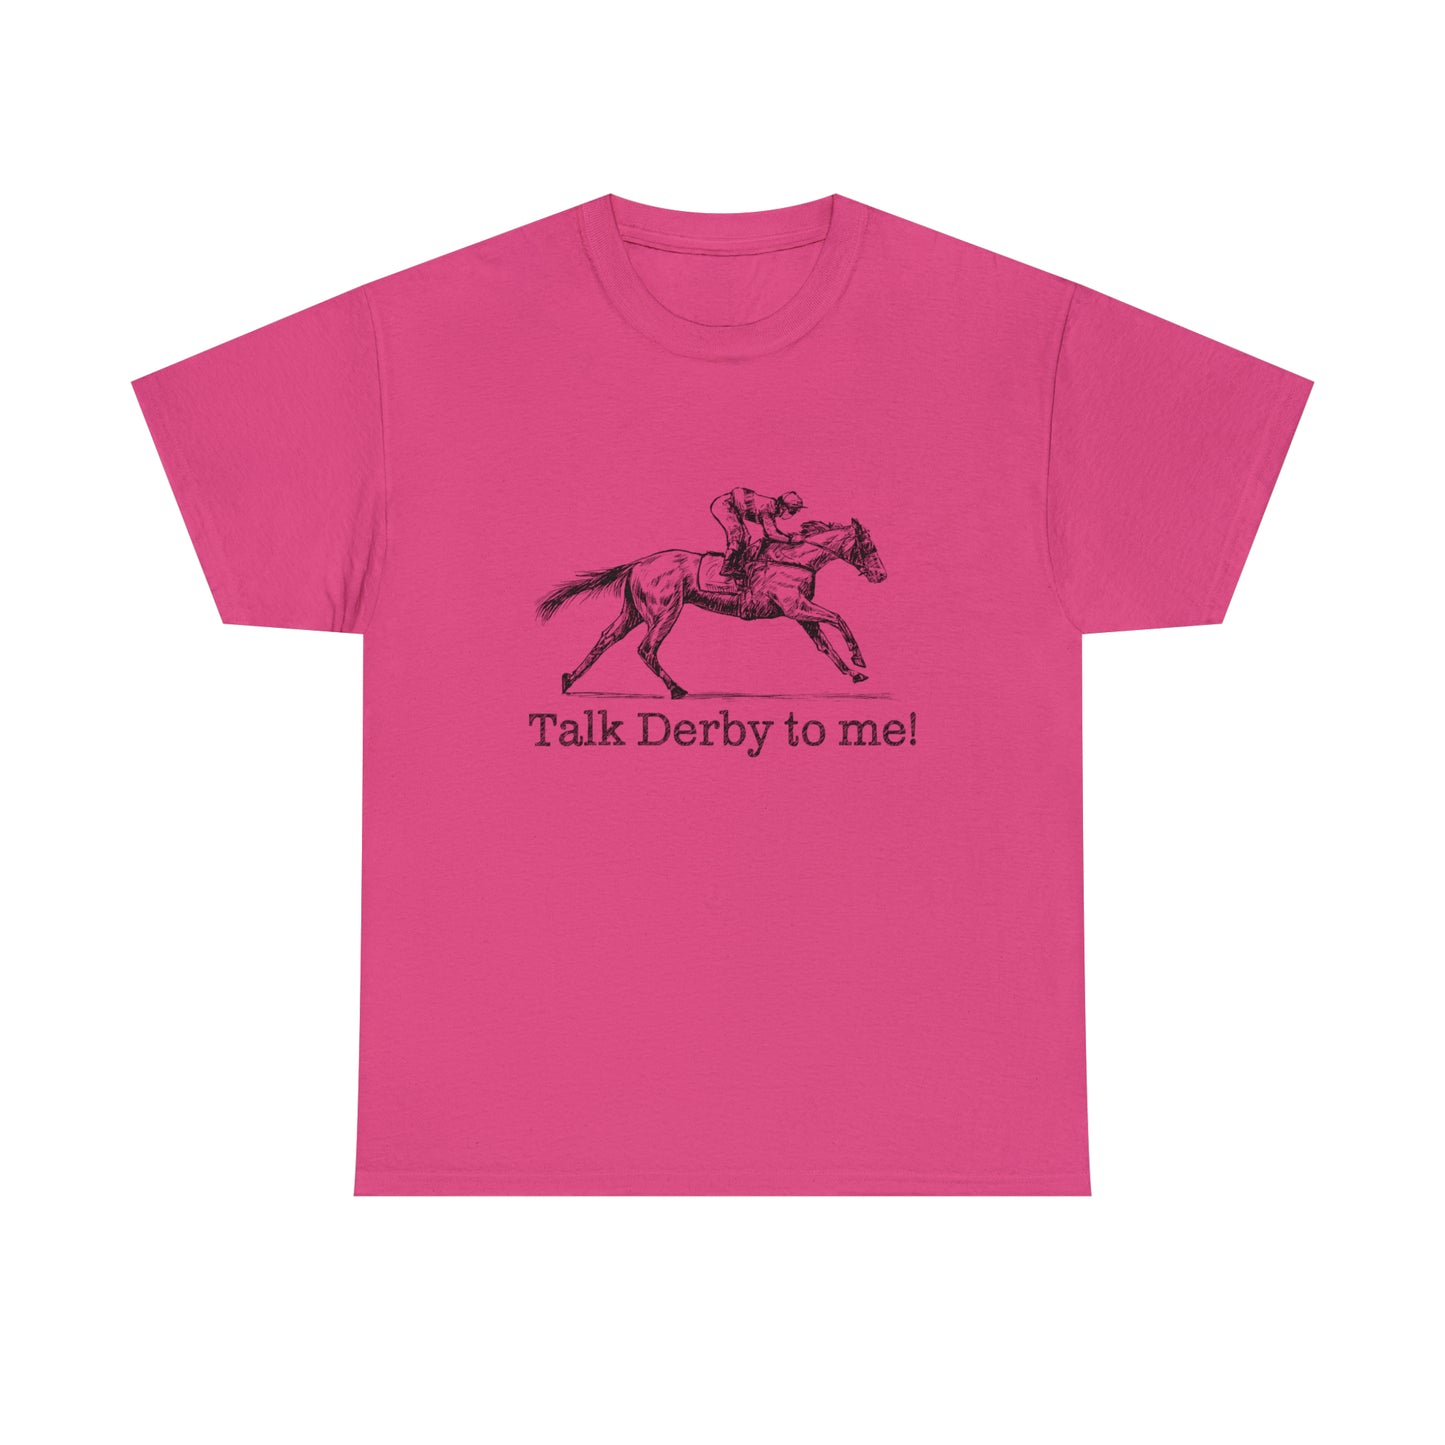 Derby Day T-Shirt For Talk Derby To Me TShirt For Kentucky Derby Shirt For Horse Racing T Shirt For Jockey Shirt With Racehorse Tee